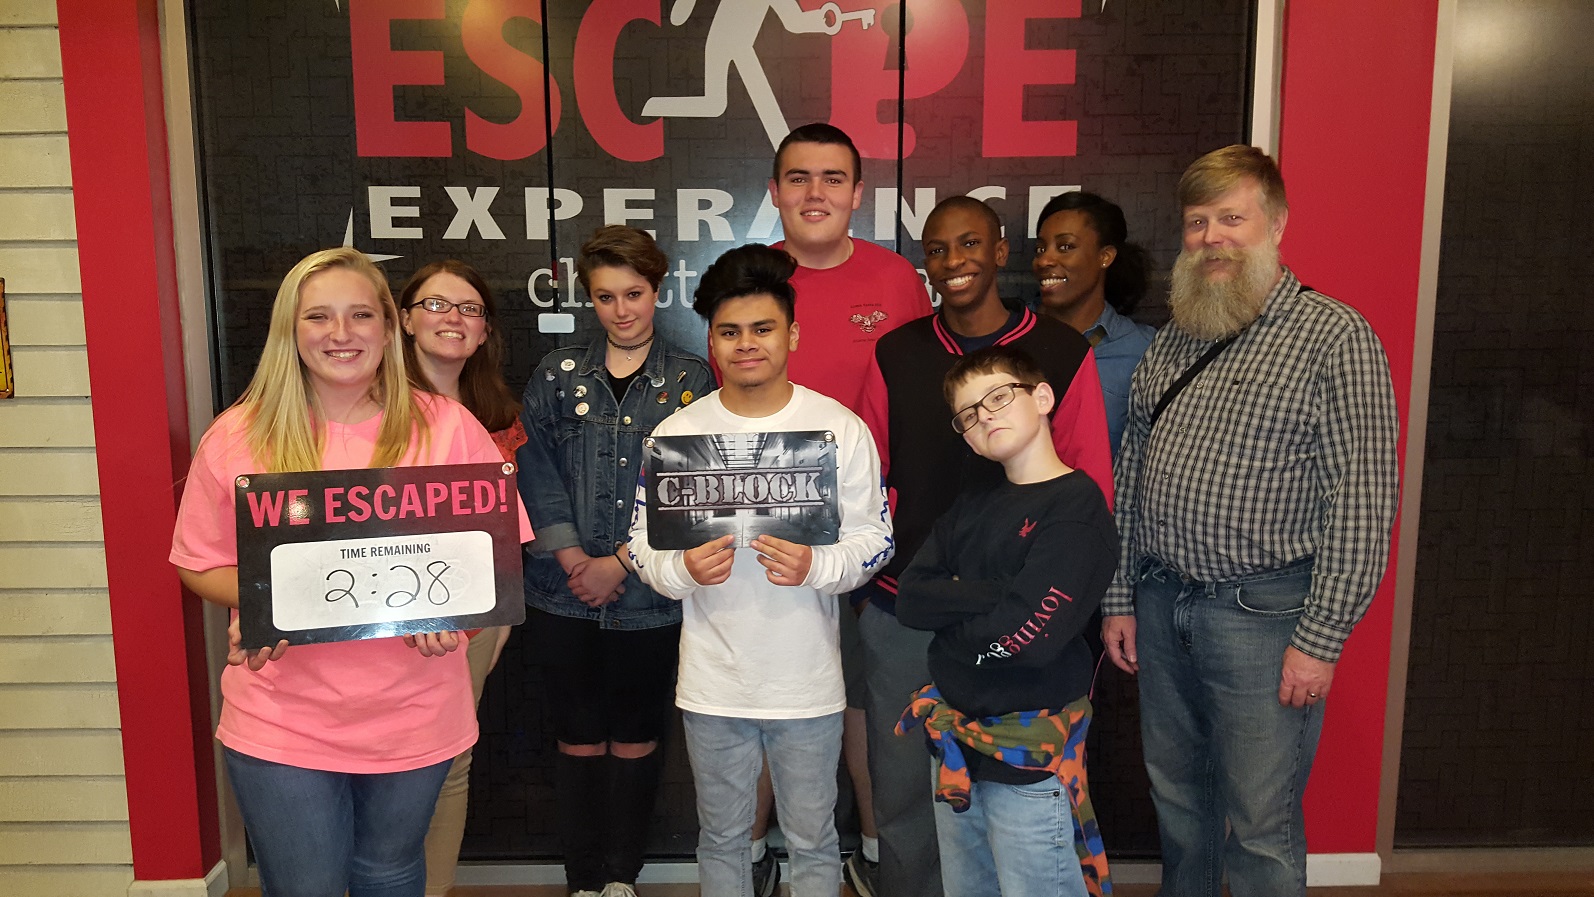 Teen Retreat at Escape Experience2